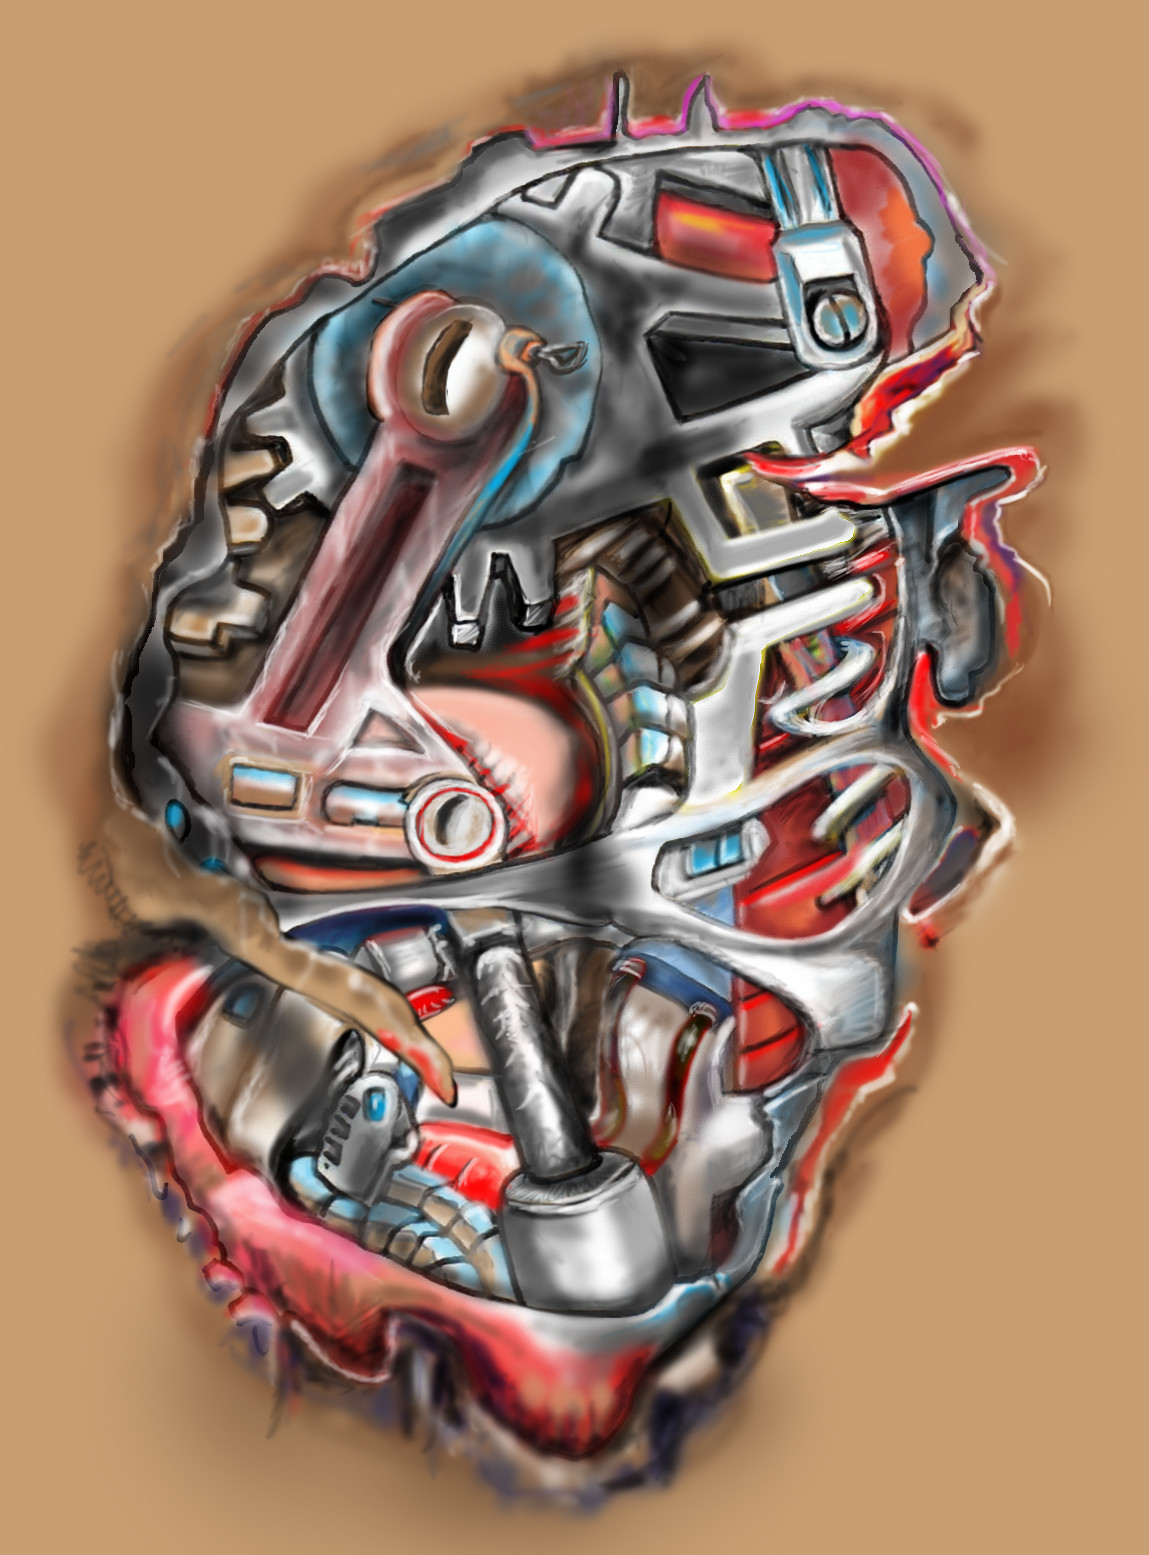 David Isaac Herman - Biomechanical Tattoo design - one of 5 parts to be designed and tattooed on a client.